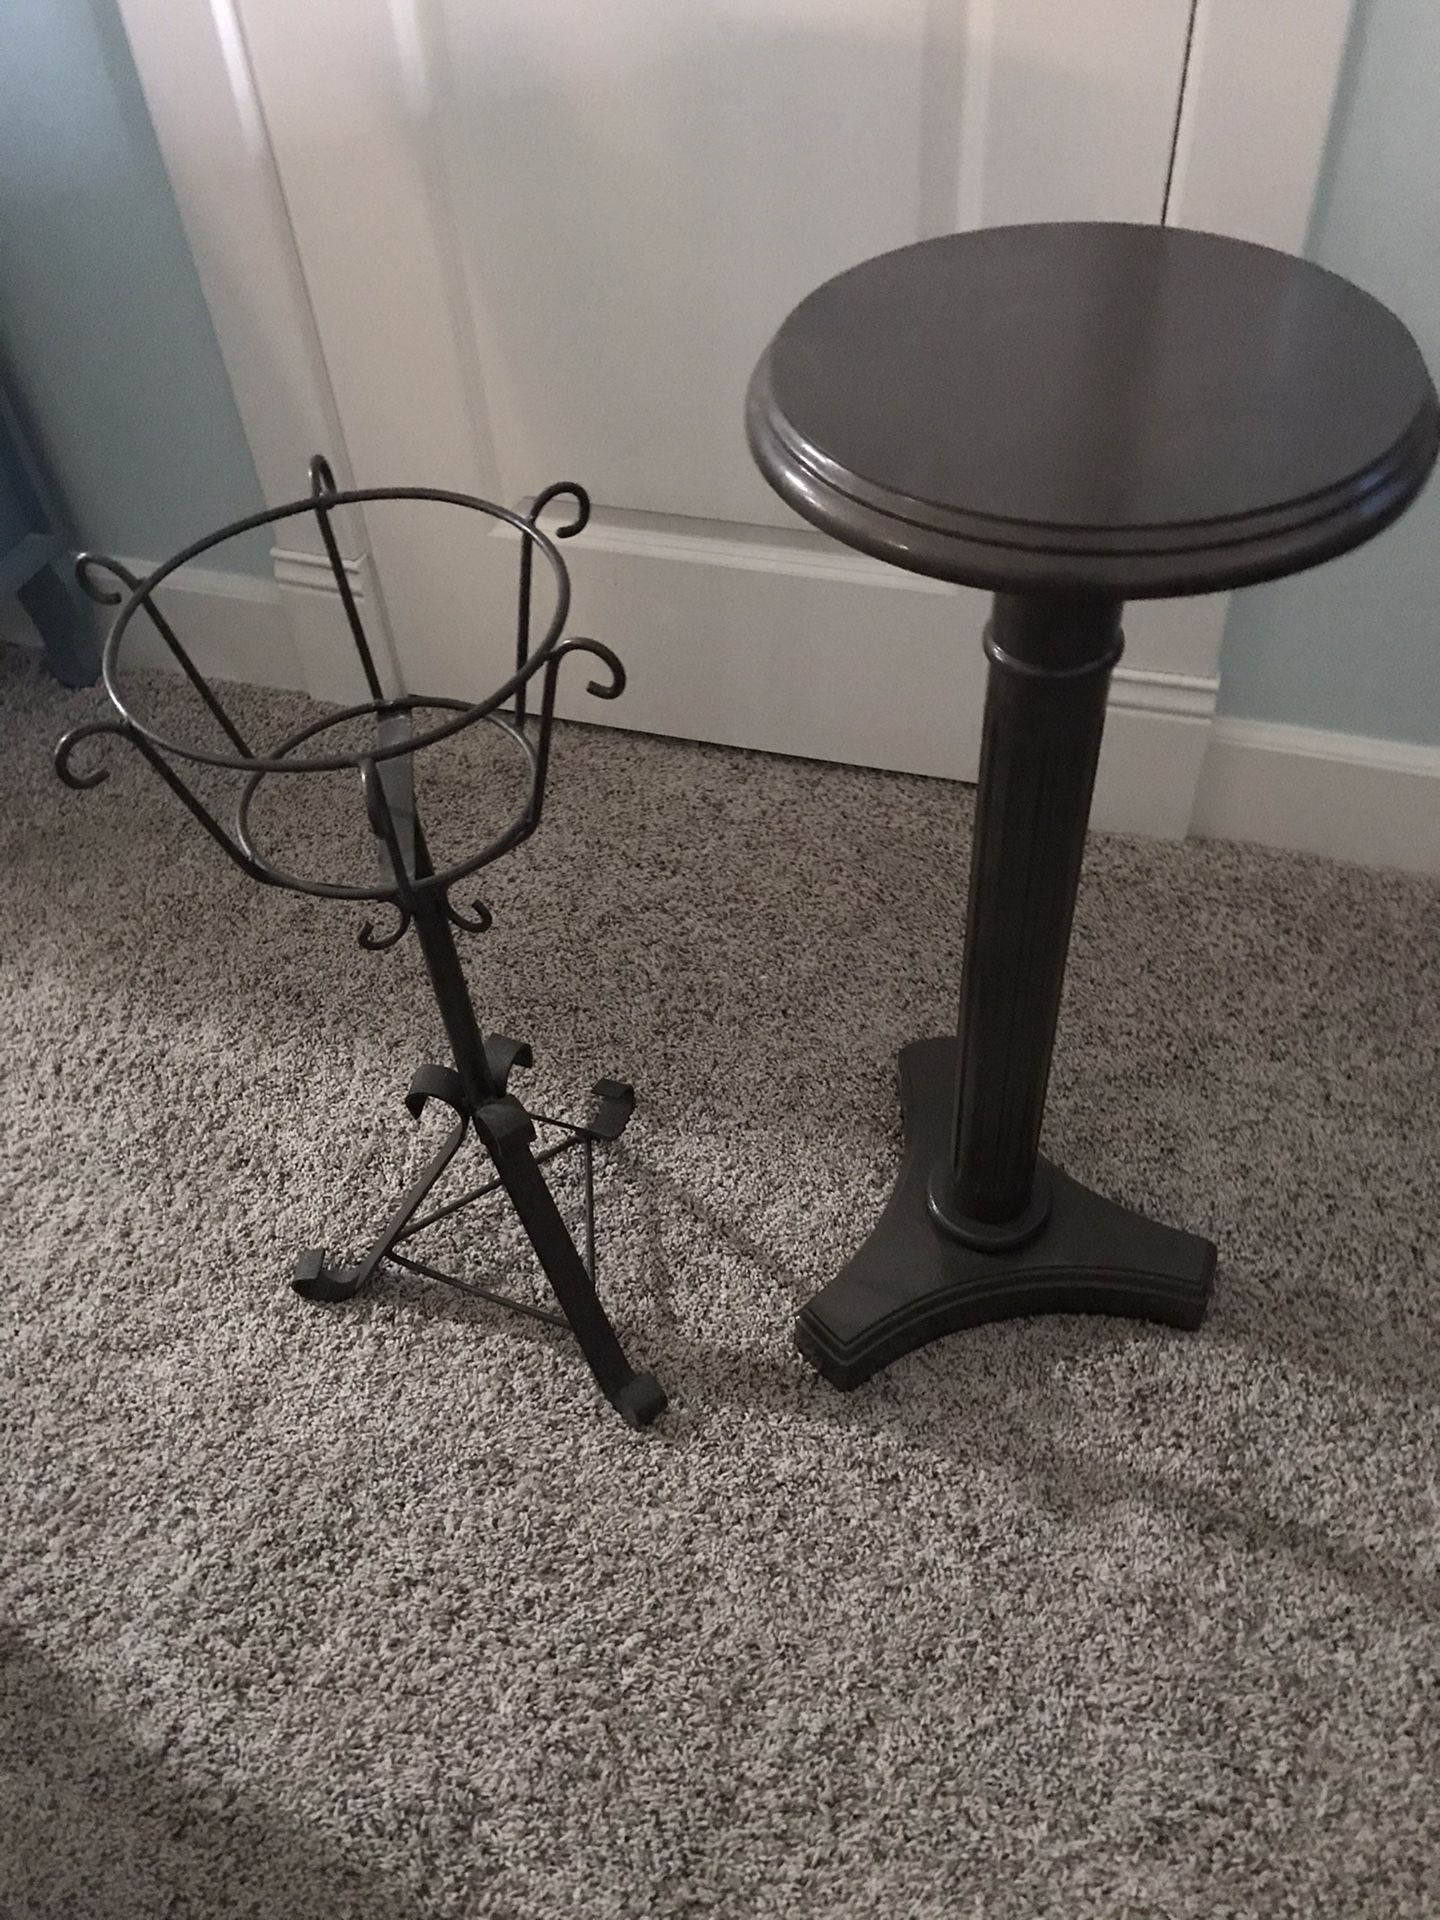 Two plant stands. One metal, one is wooden.